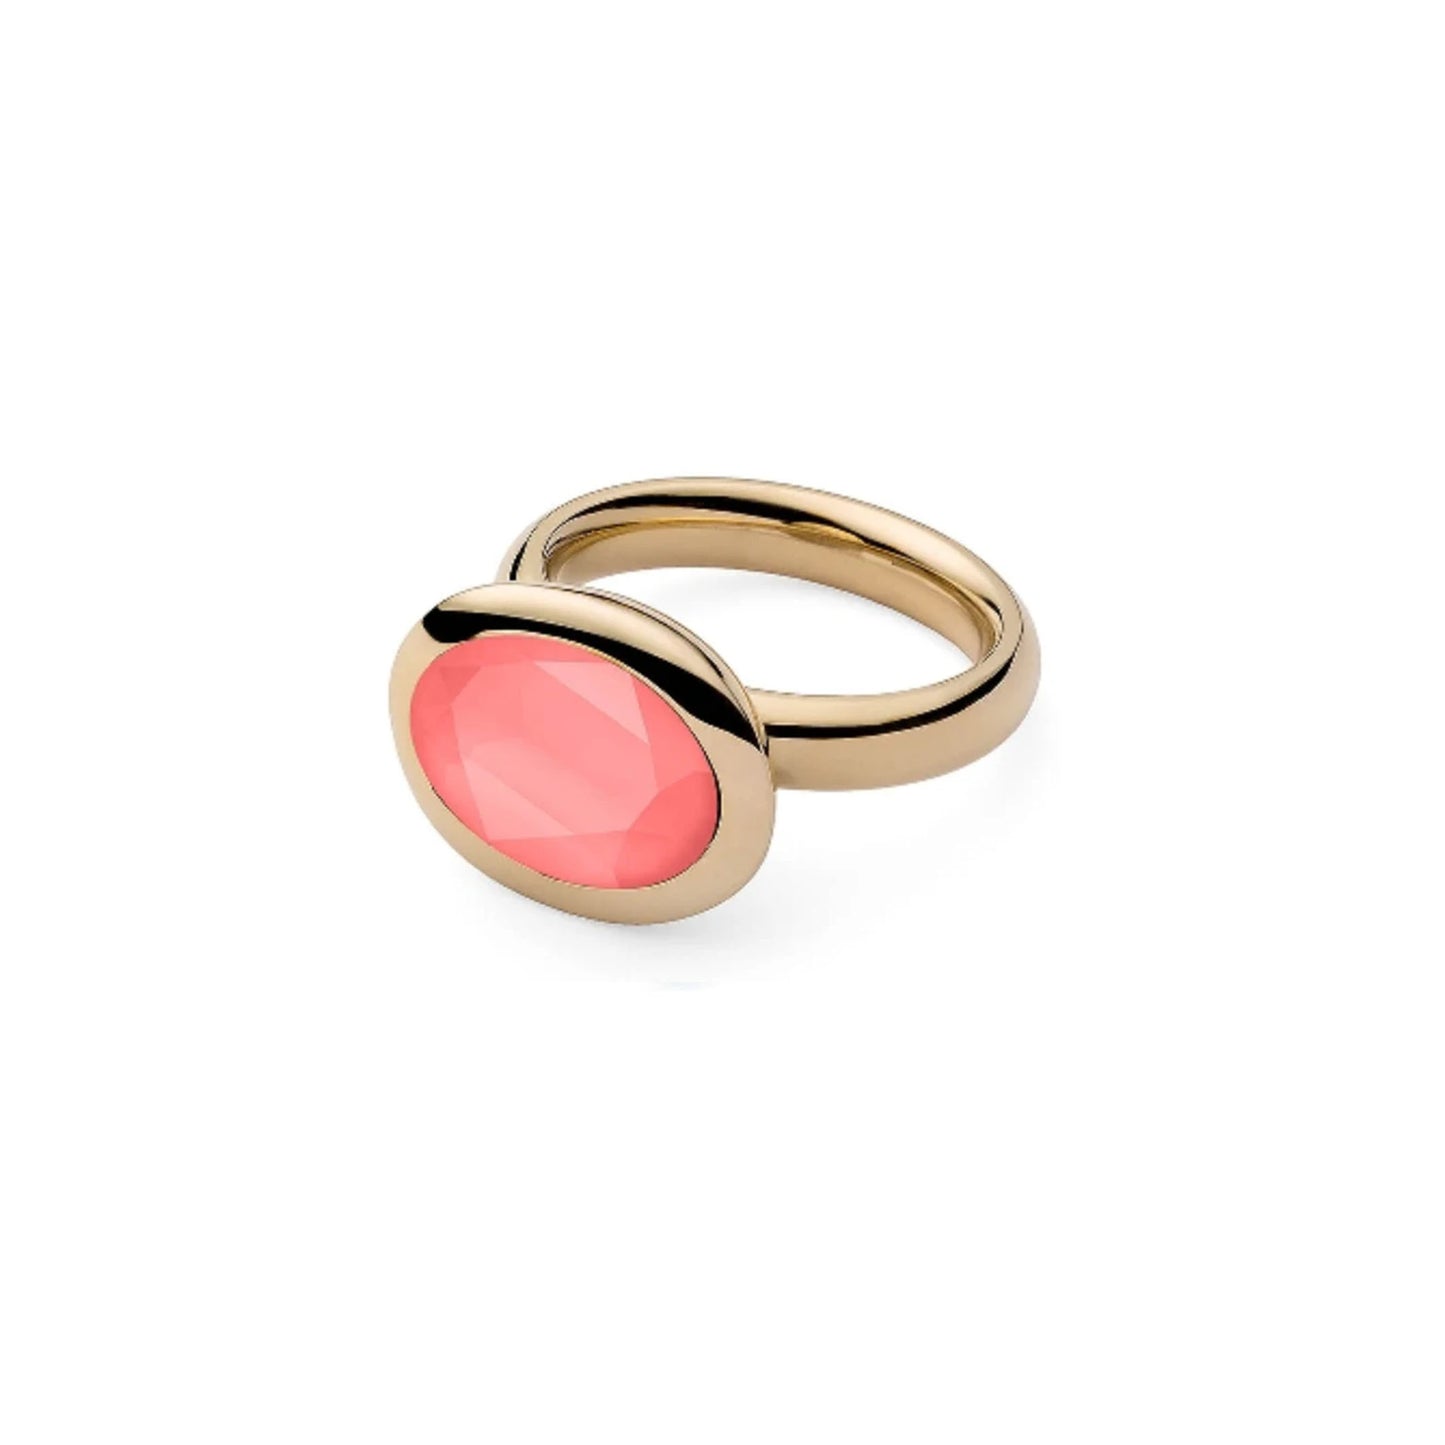 Tivola Ring in Gold - Light Coral